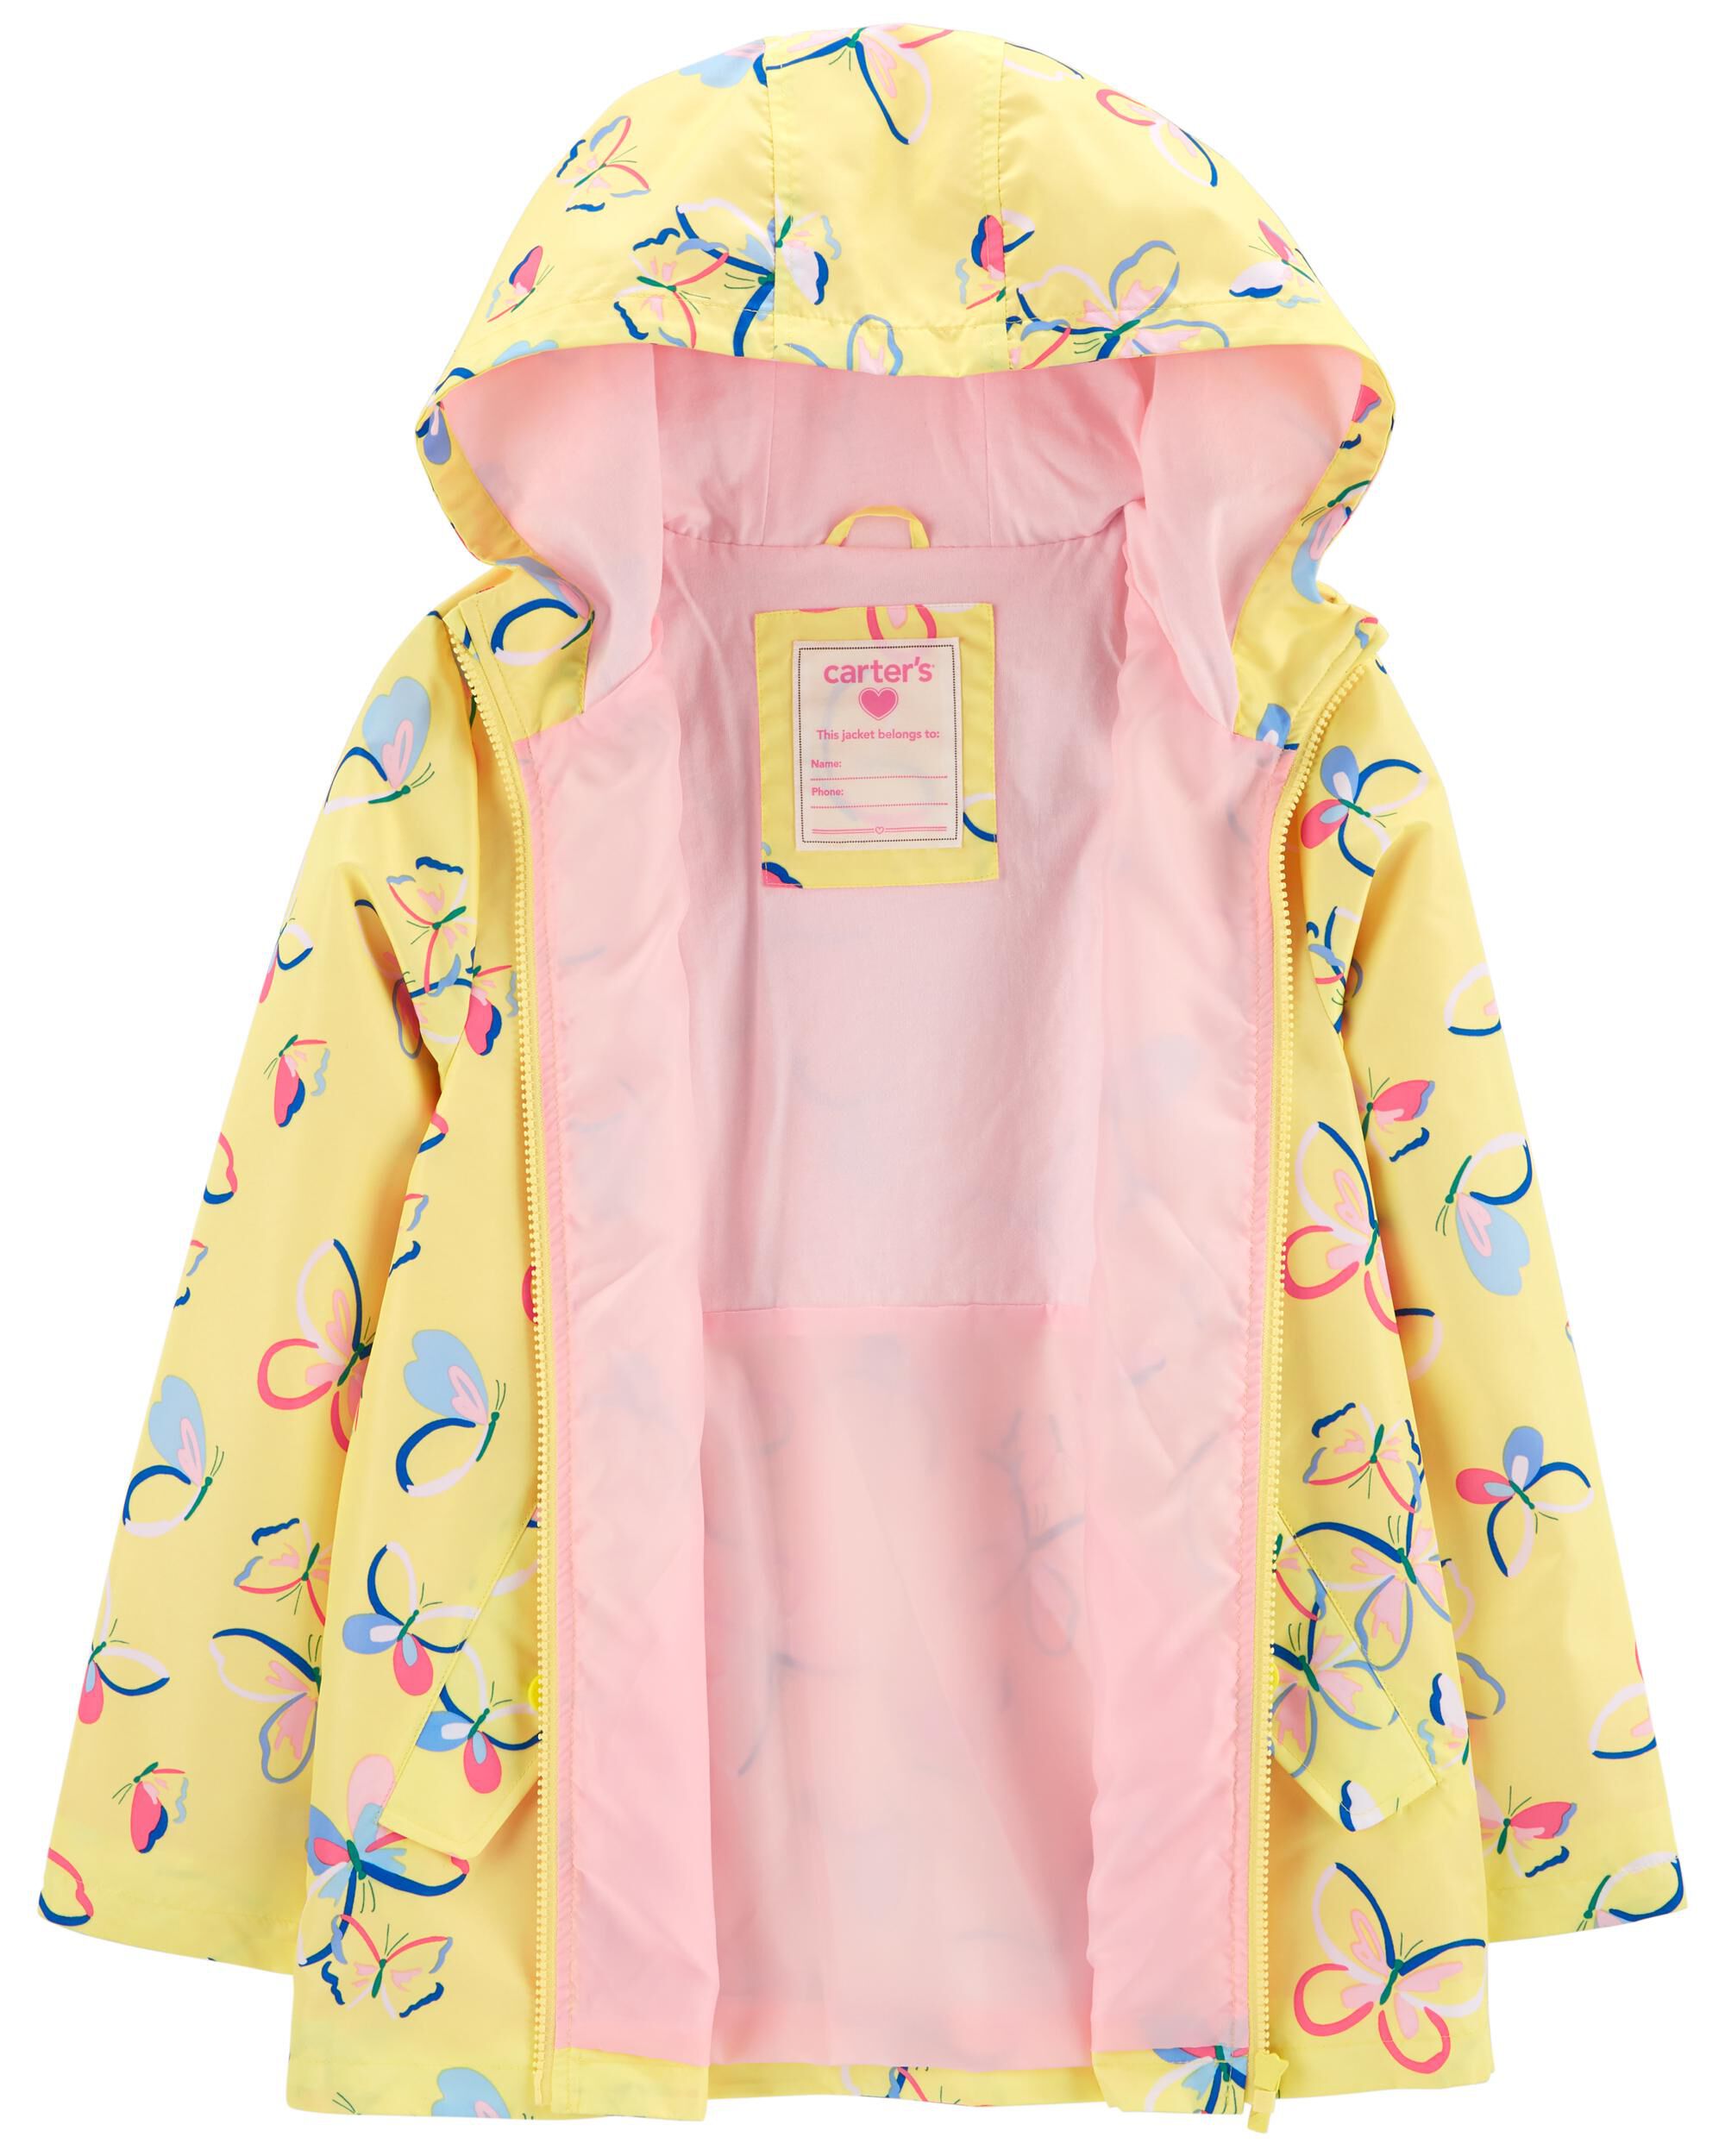 New Carter's Girls Yellow Raincoat Jacket NWT 14 year Flowers Bloom Up Pocket 